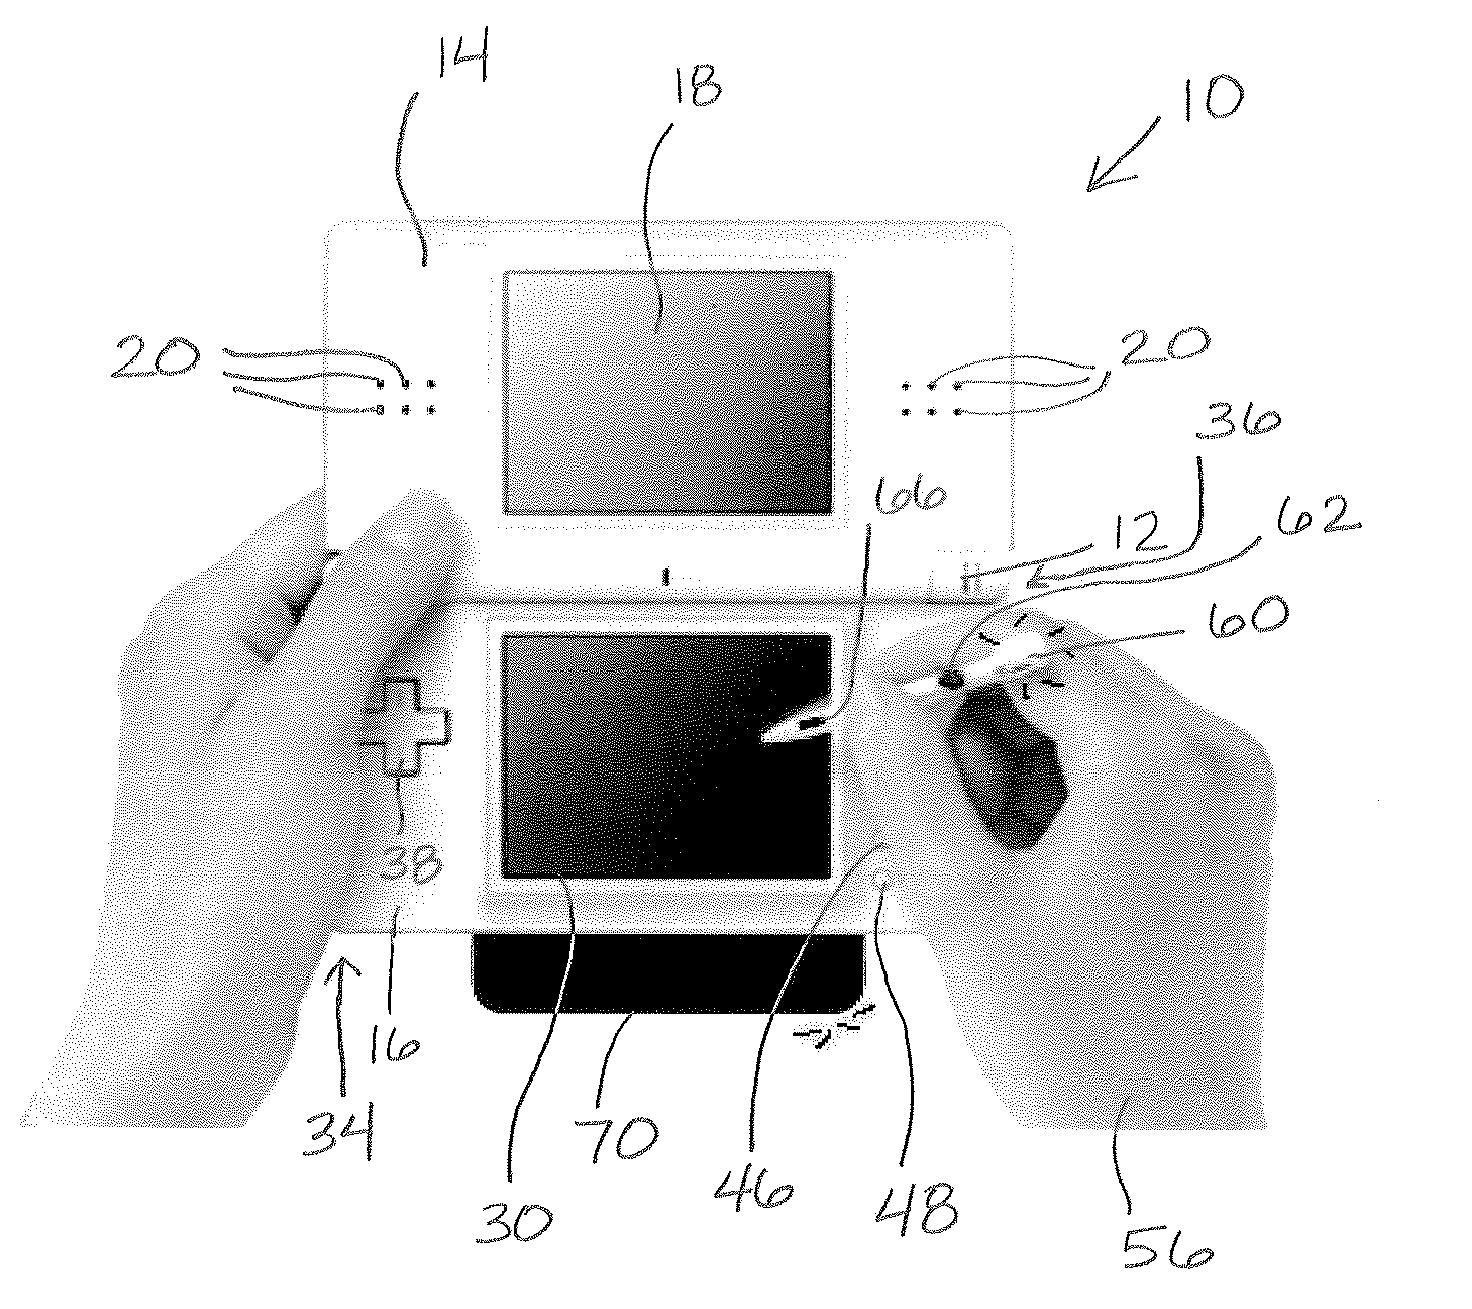 System for and method of operating video game system with control actuator-equipped stylus